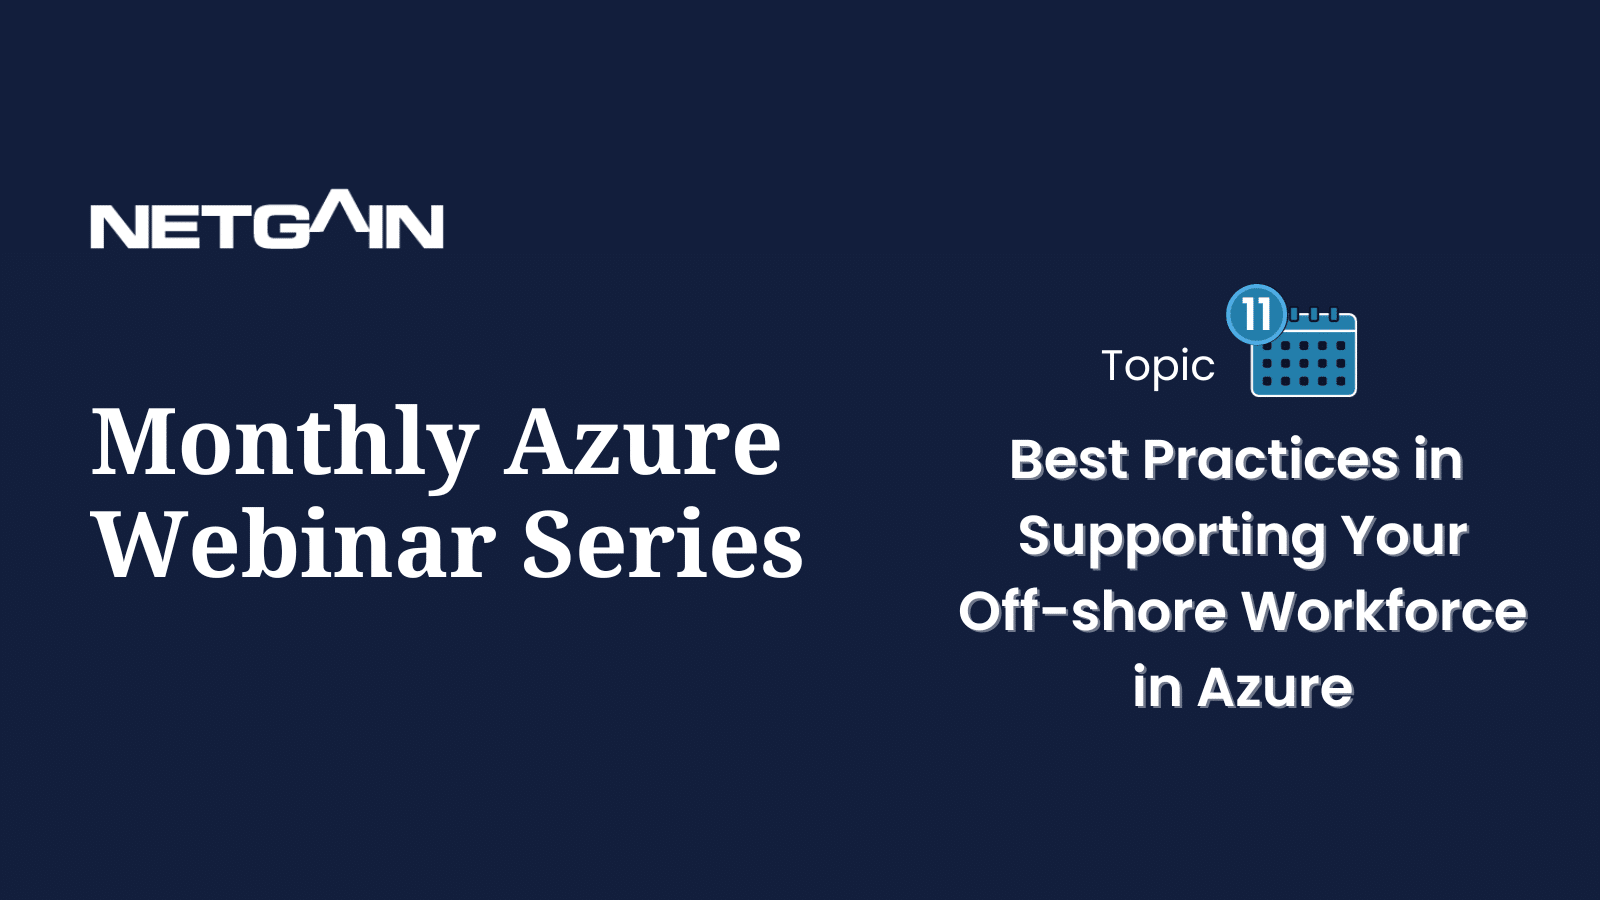 Monthly Azure Webinar Series: Best Practices in Supporting Your Off-shore Workforce in Azure